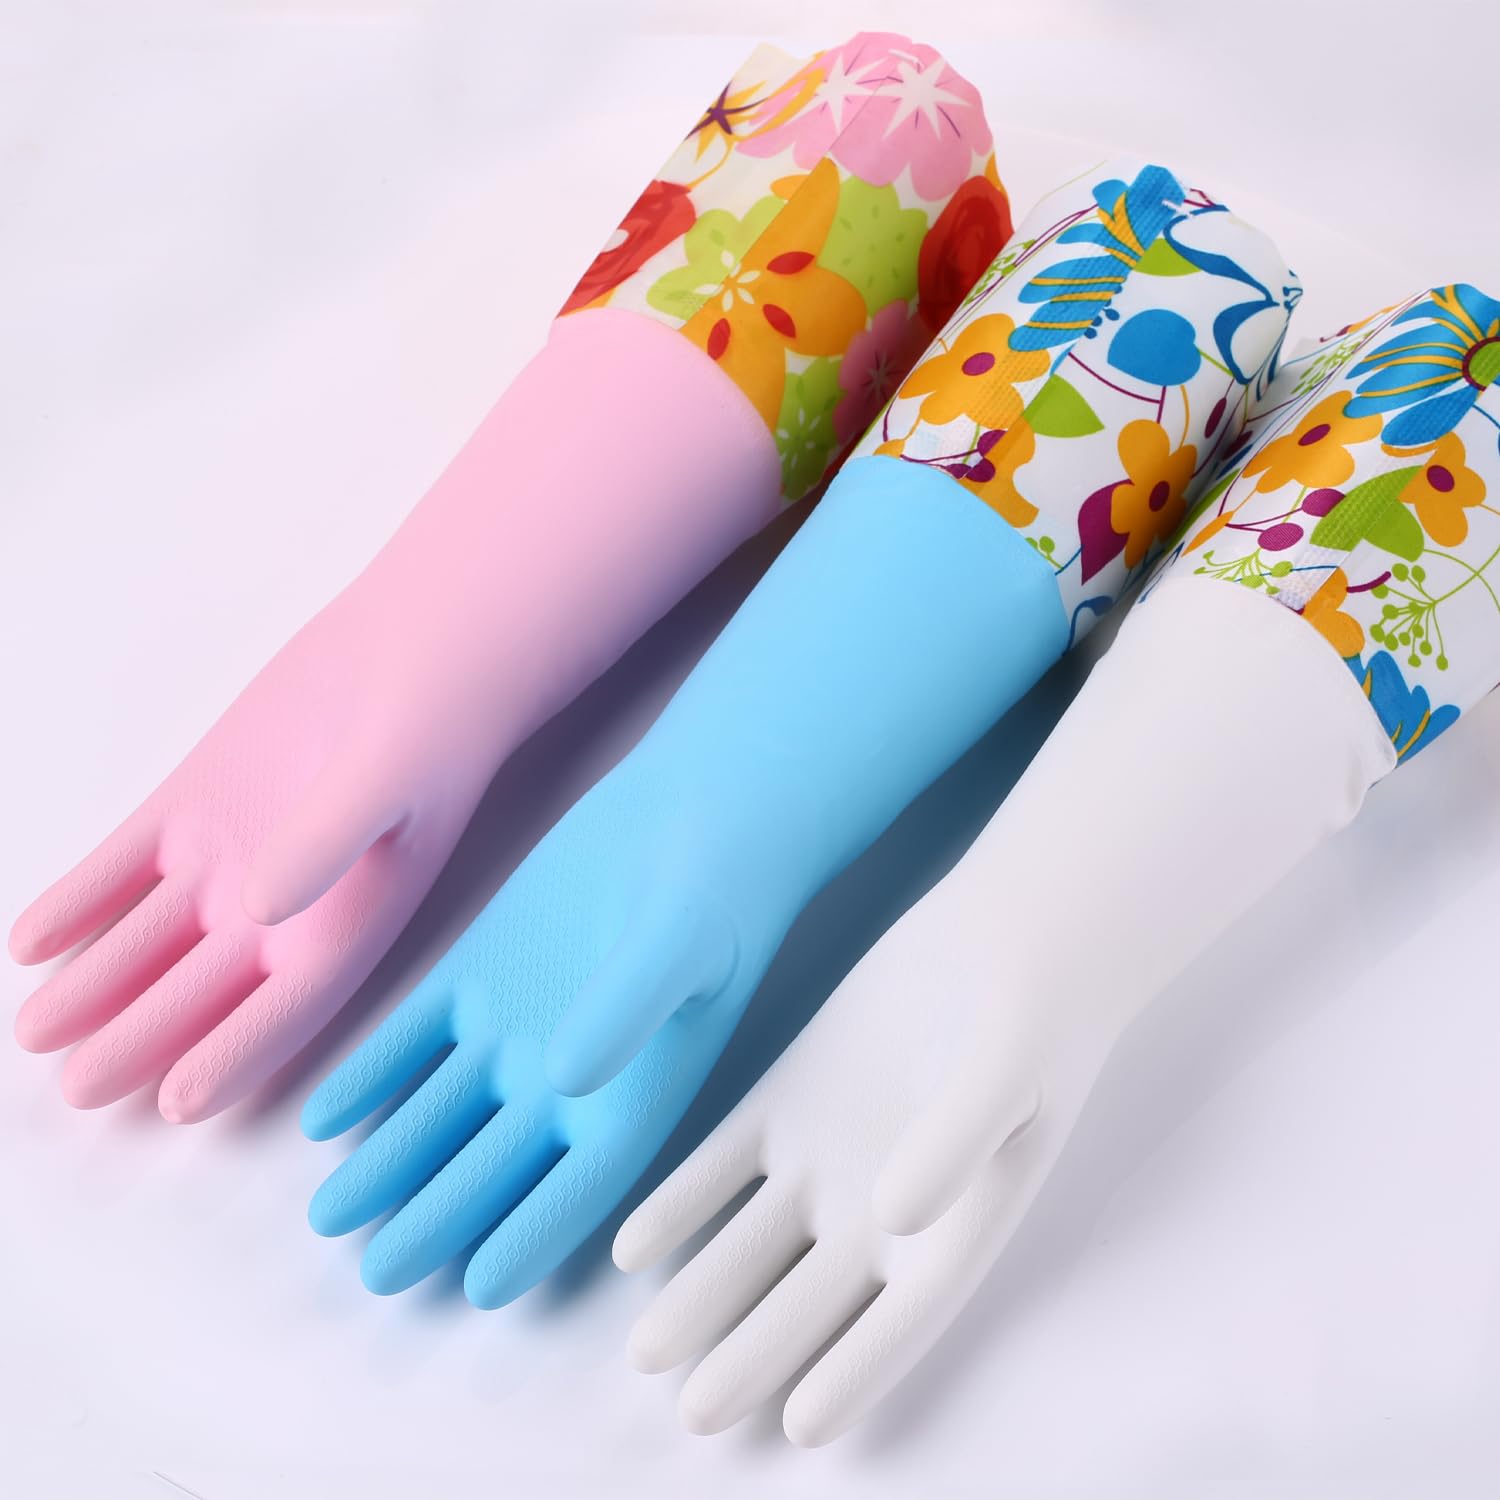 Bamllum 3 Pairs Rubber Cleaning Gloves, Household Kitchen Dishwashing Gloves with Cotton Flocked Liner, Long Cuff 16 Inches, Reusable, Non-Slip (Small, Blue+Pink+White)